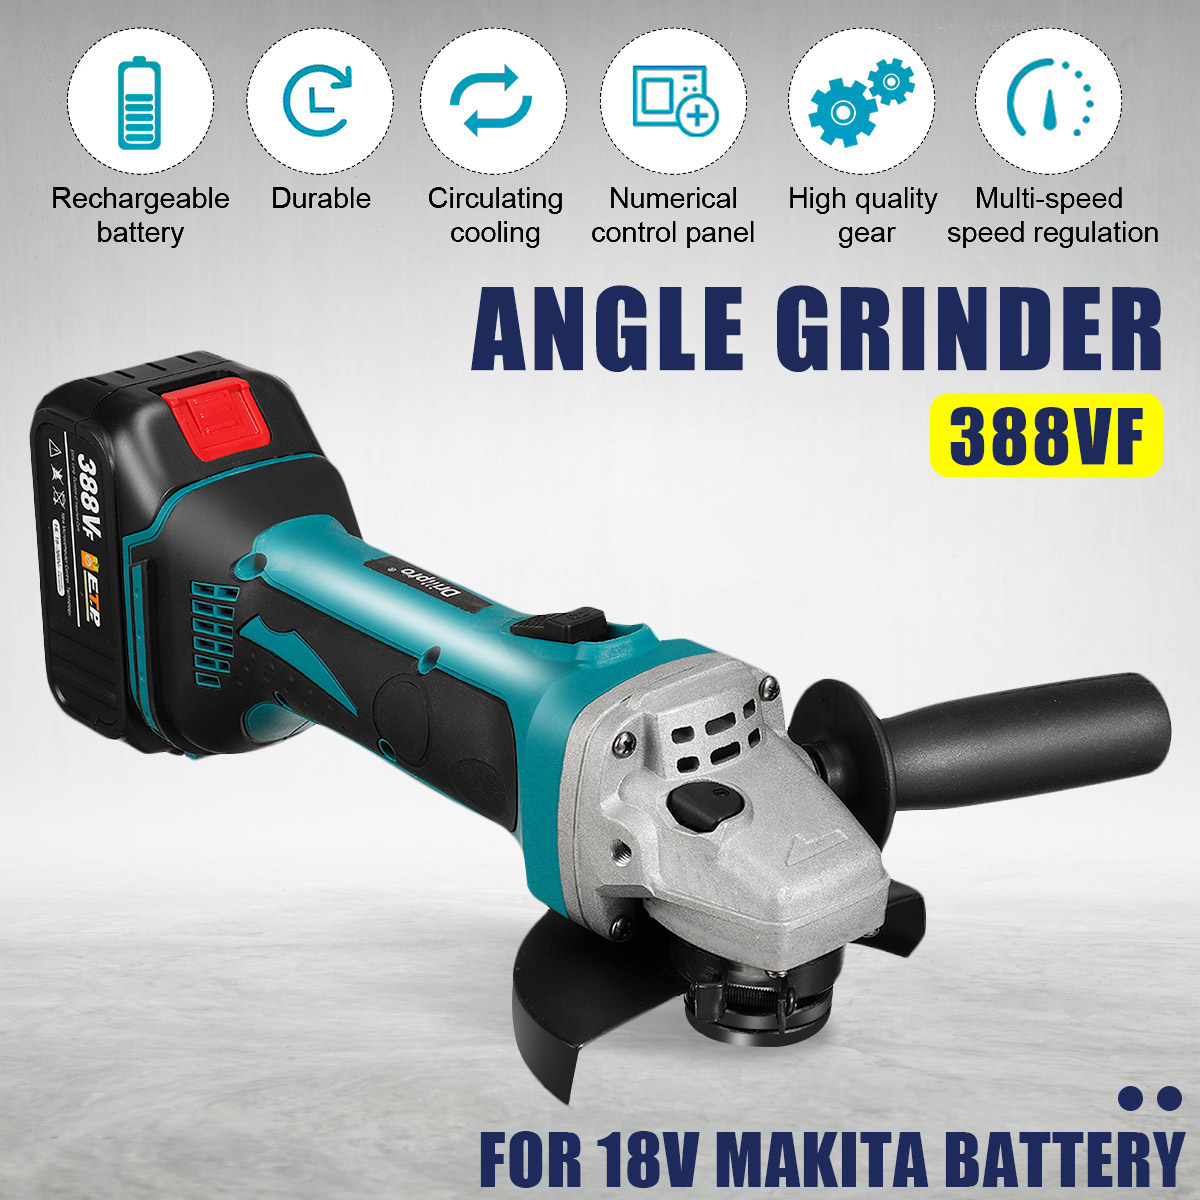 Drillpro-388VF-125mm-BlueBalck-Brushless-Motor-8500rpm-800W-Compact-Lithium-Electric-Polisher-1962696-4